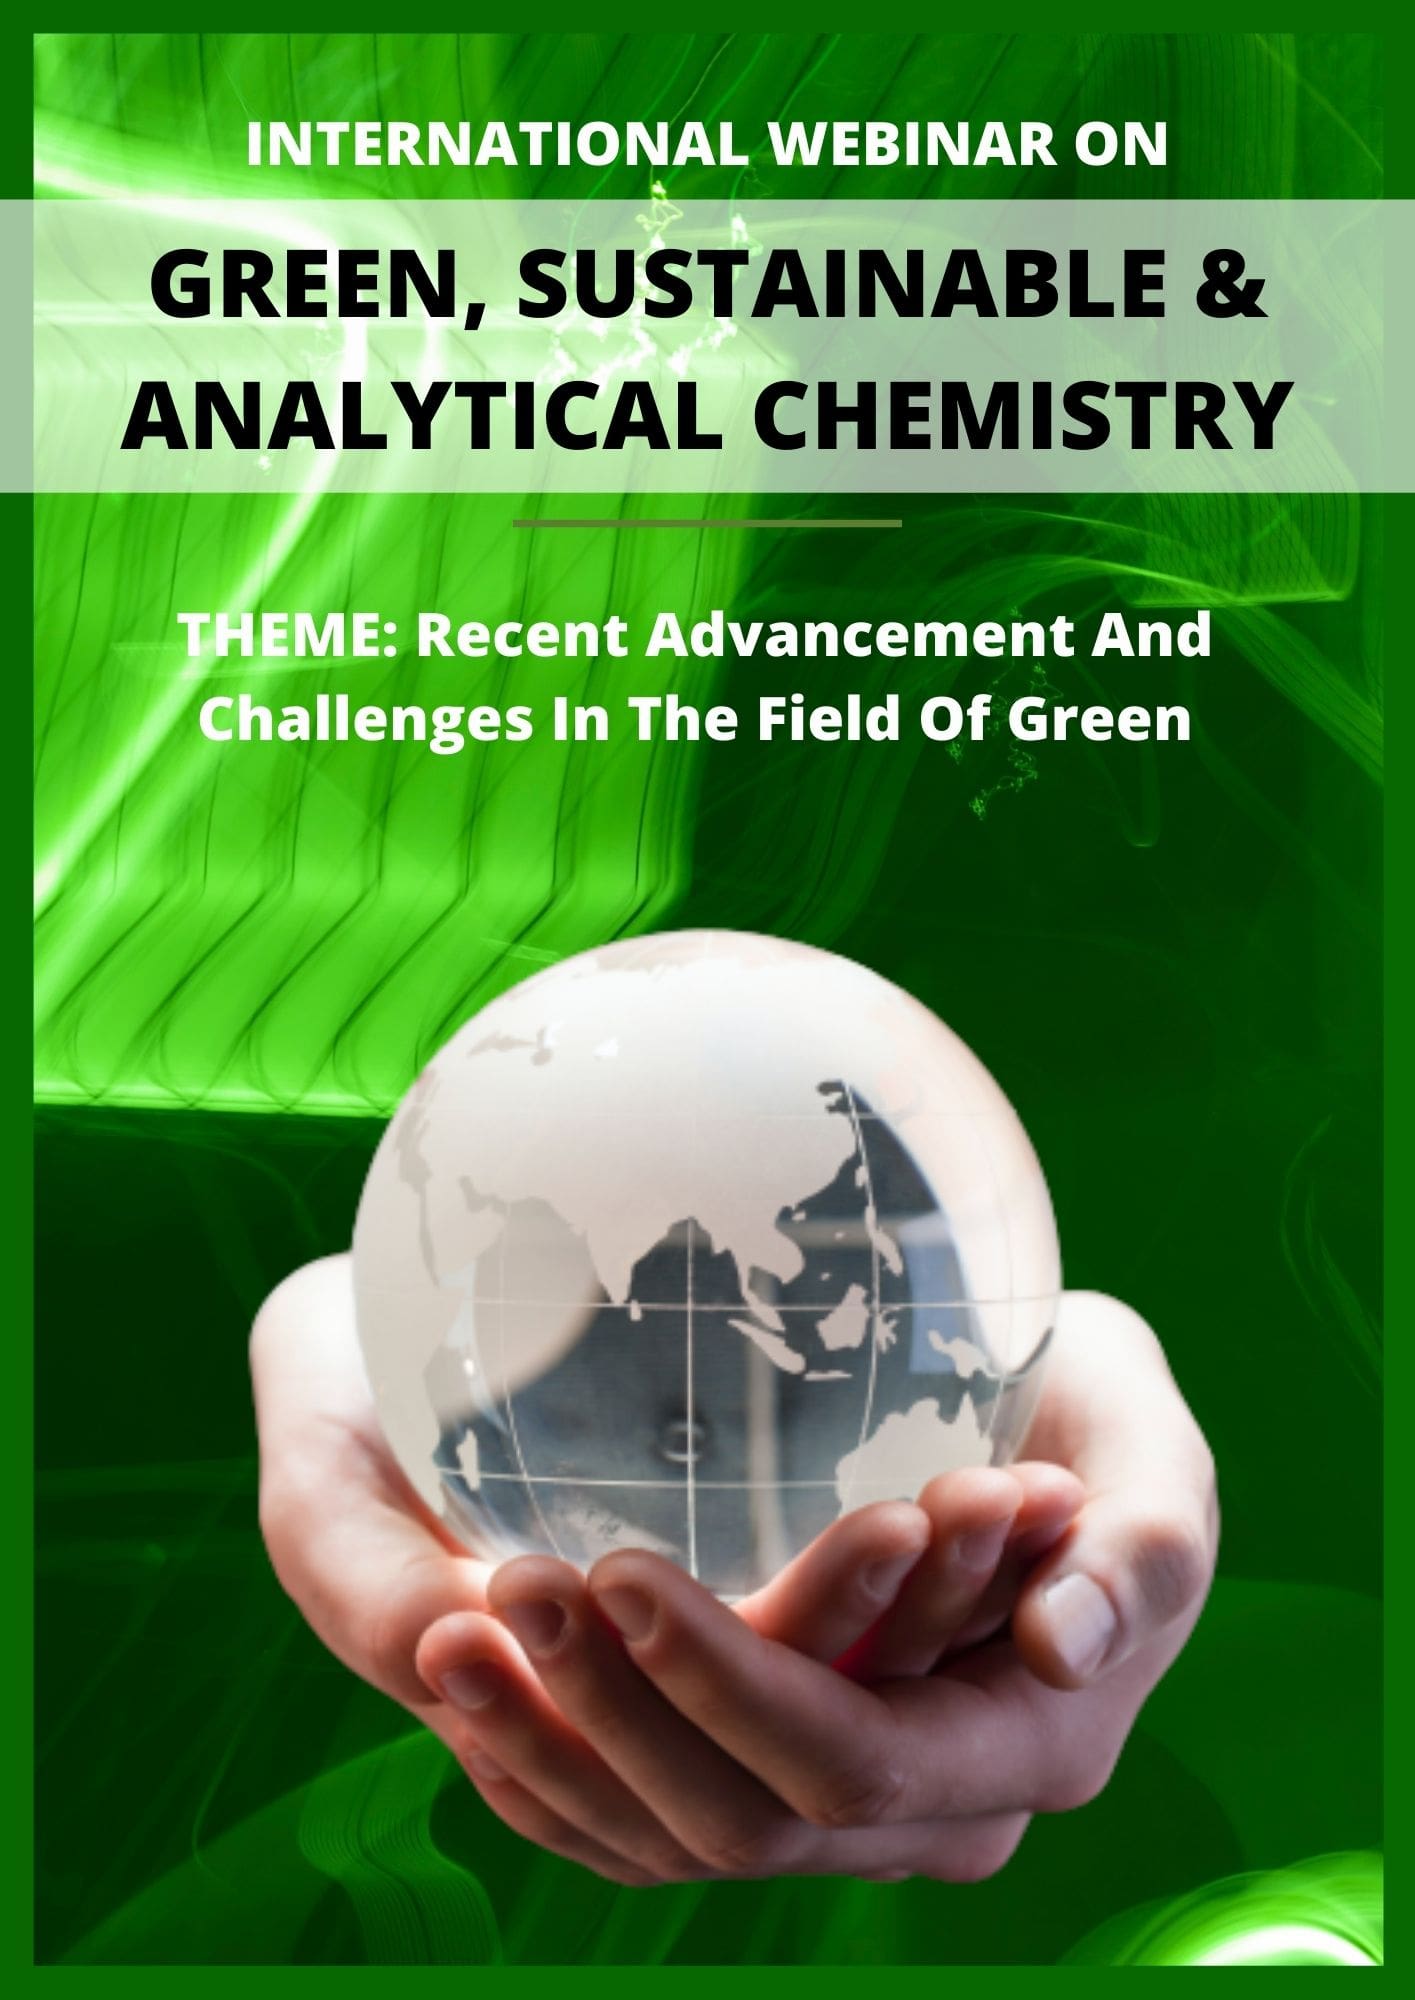 research journal of chemistry and environment paper submission